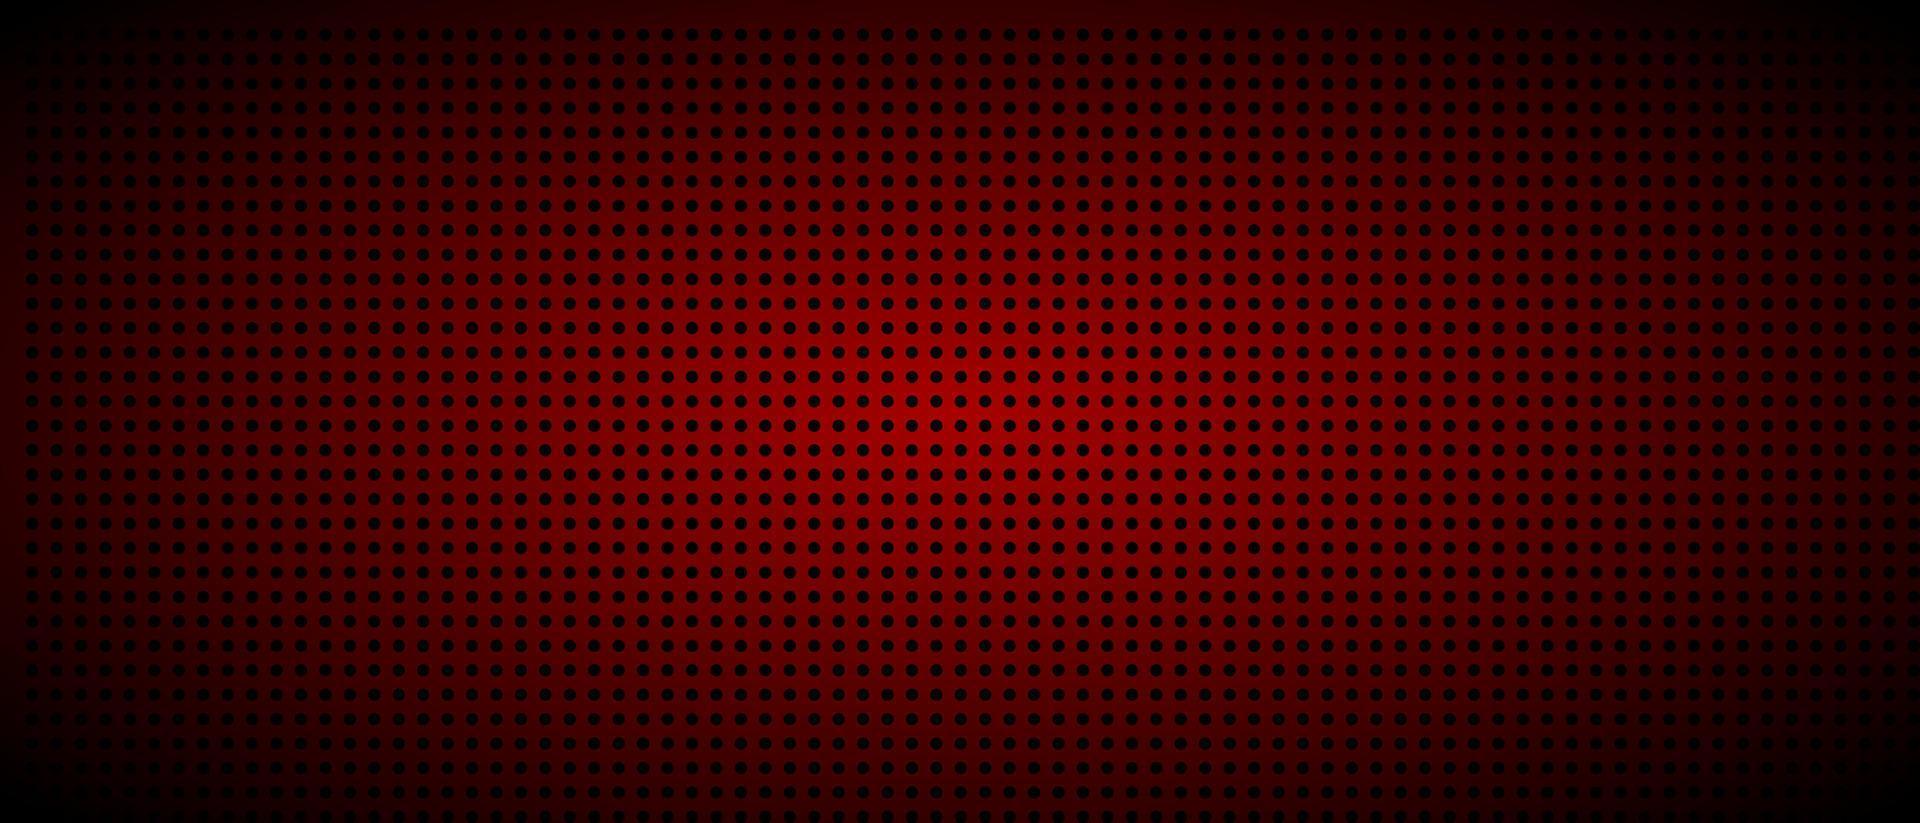 Futuristic perforated technology abstract background. Vector banner design